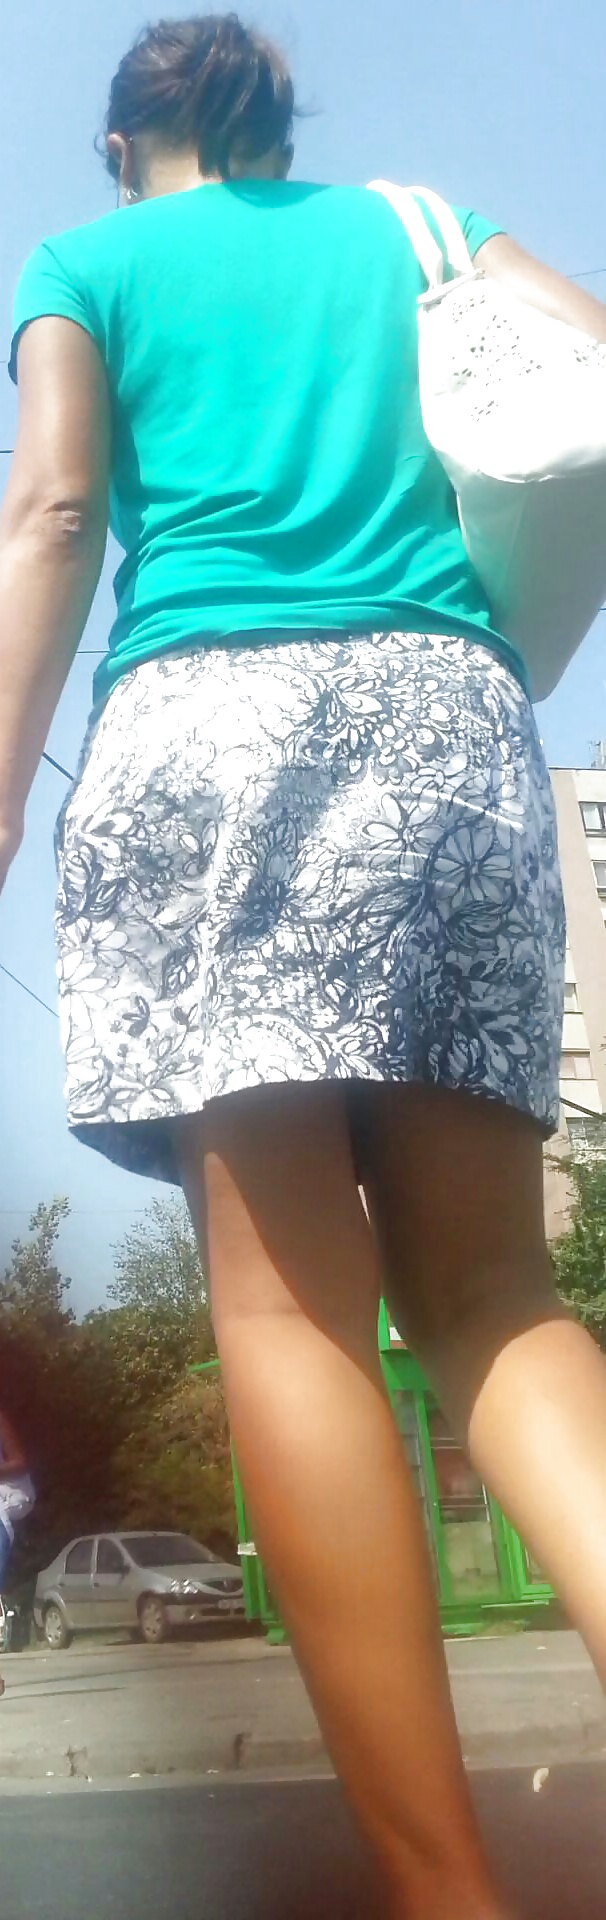 Spy old + young sexy skirt romanian #28213008